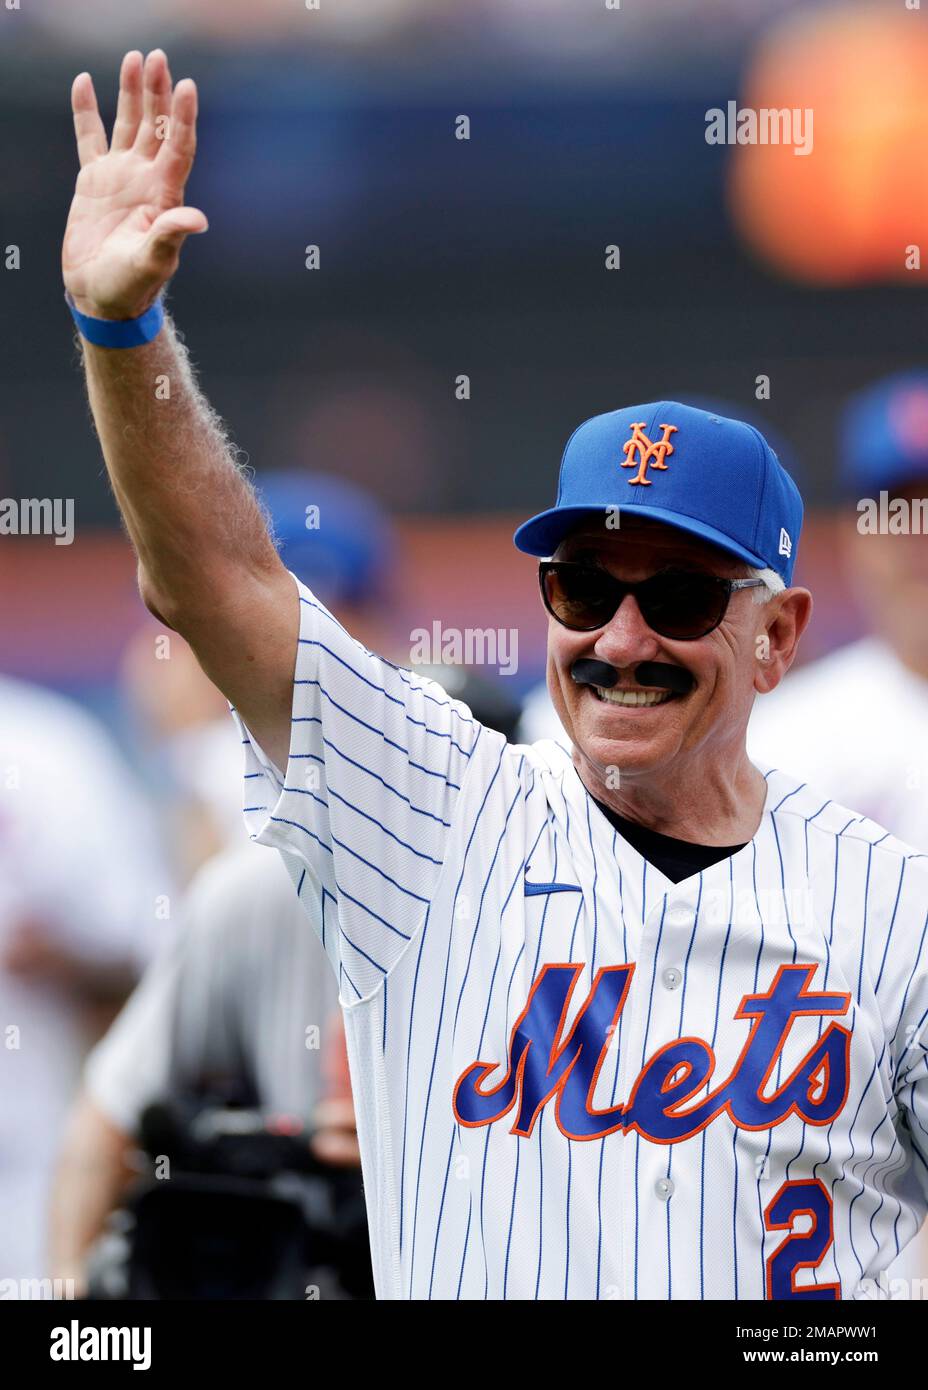 Former New York Mets manager Bobby Valentine waves as he is introduced  during an Old-Timers' Day ceremony before a baseball game between the  Colorado Rockies and the New York Mets on Saturday